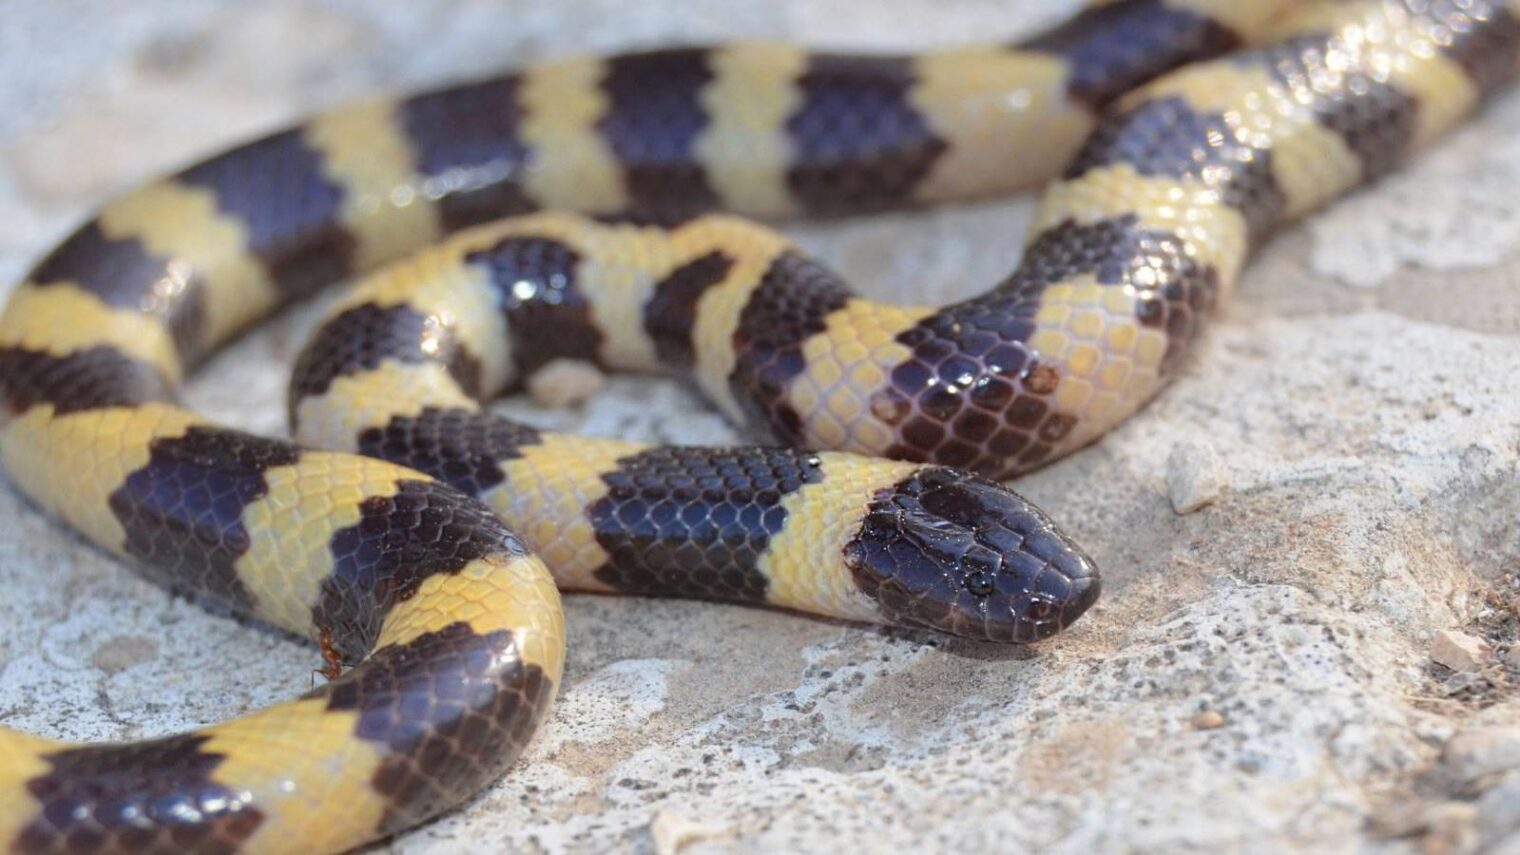 The newly identified Micrelaps snake, native to East Africa and Israel and its neighbors. Photo by David David.